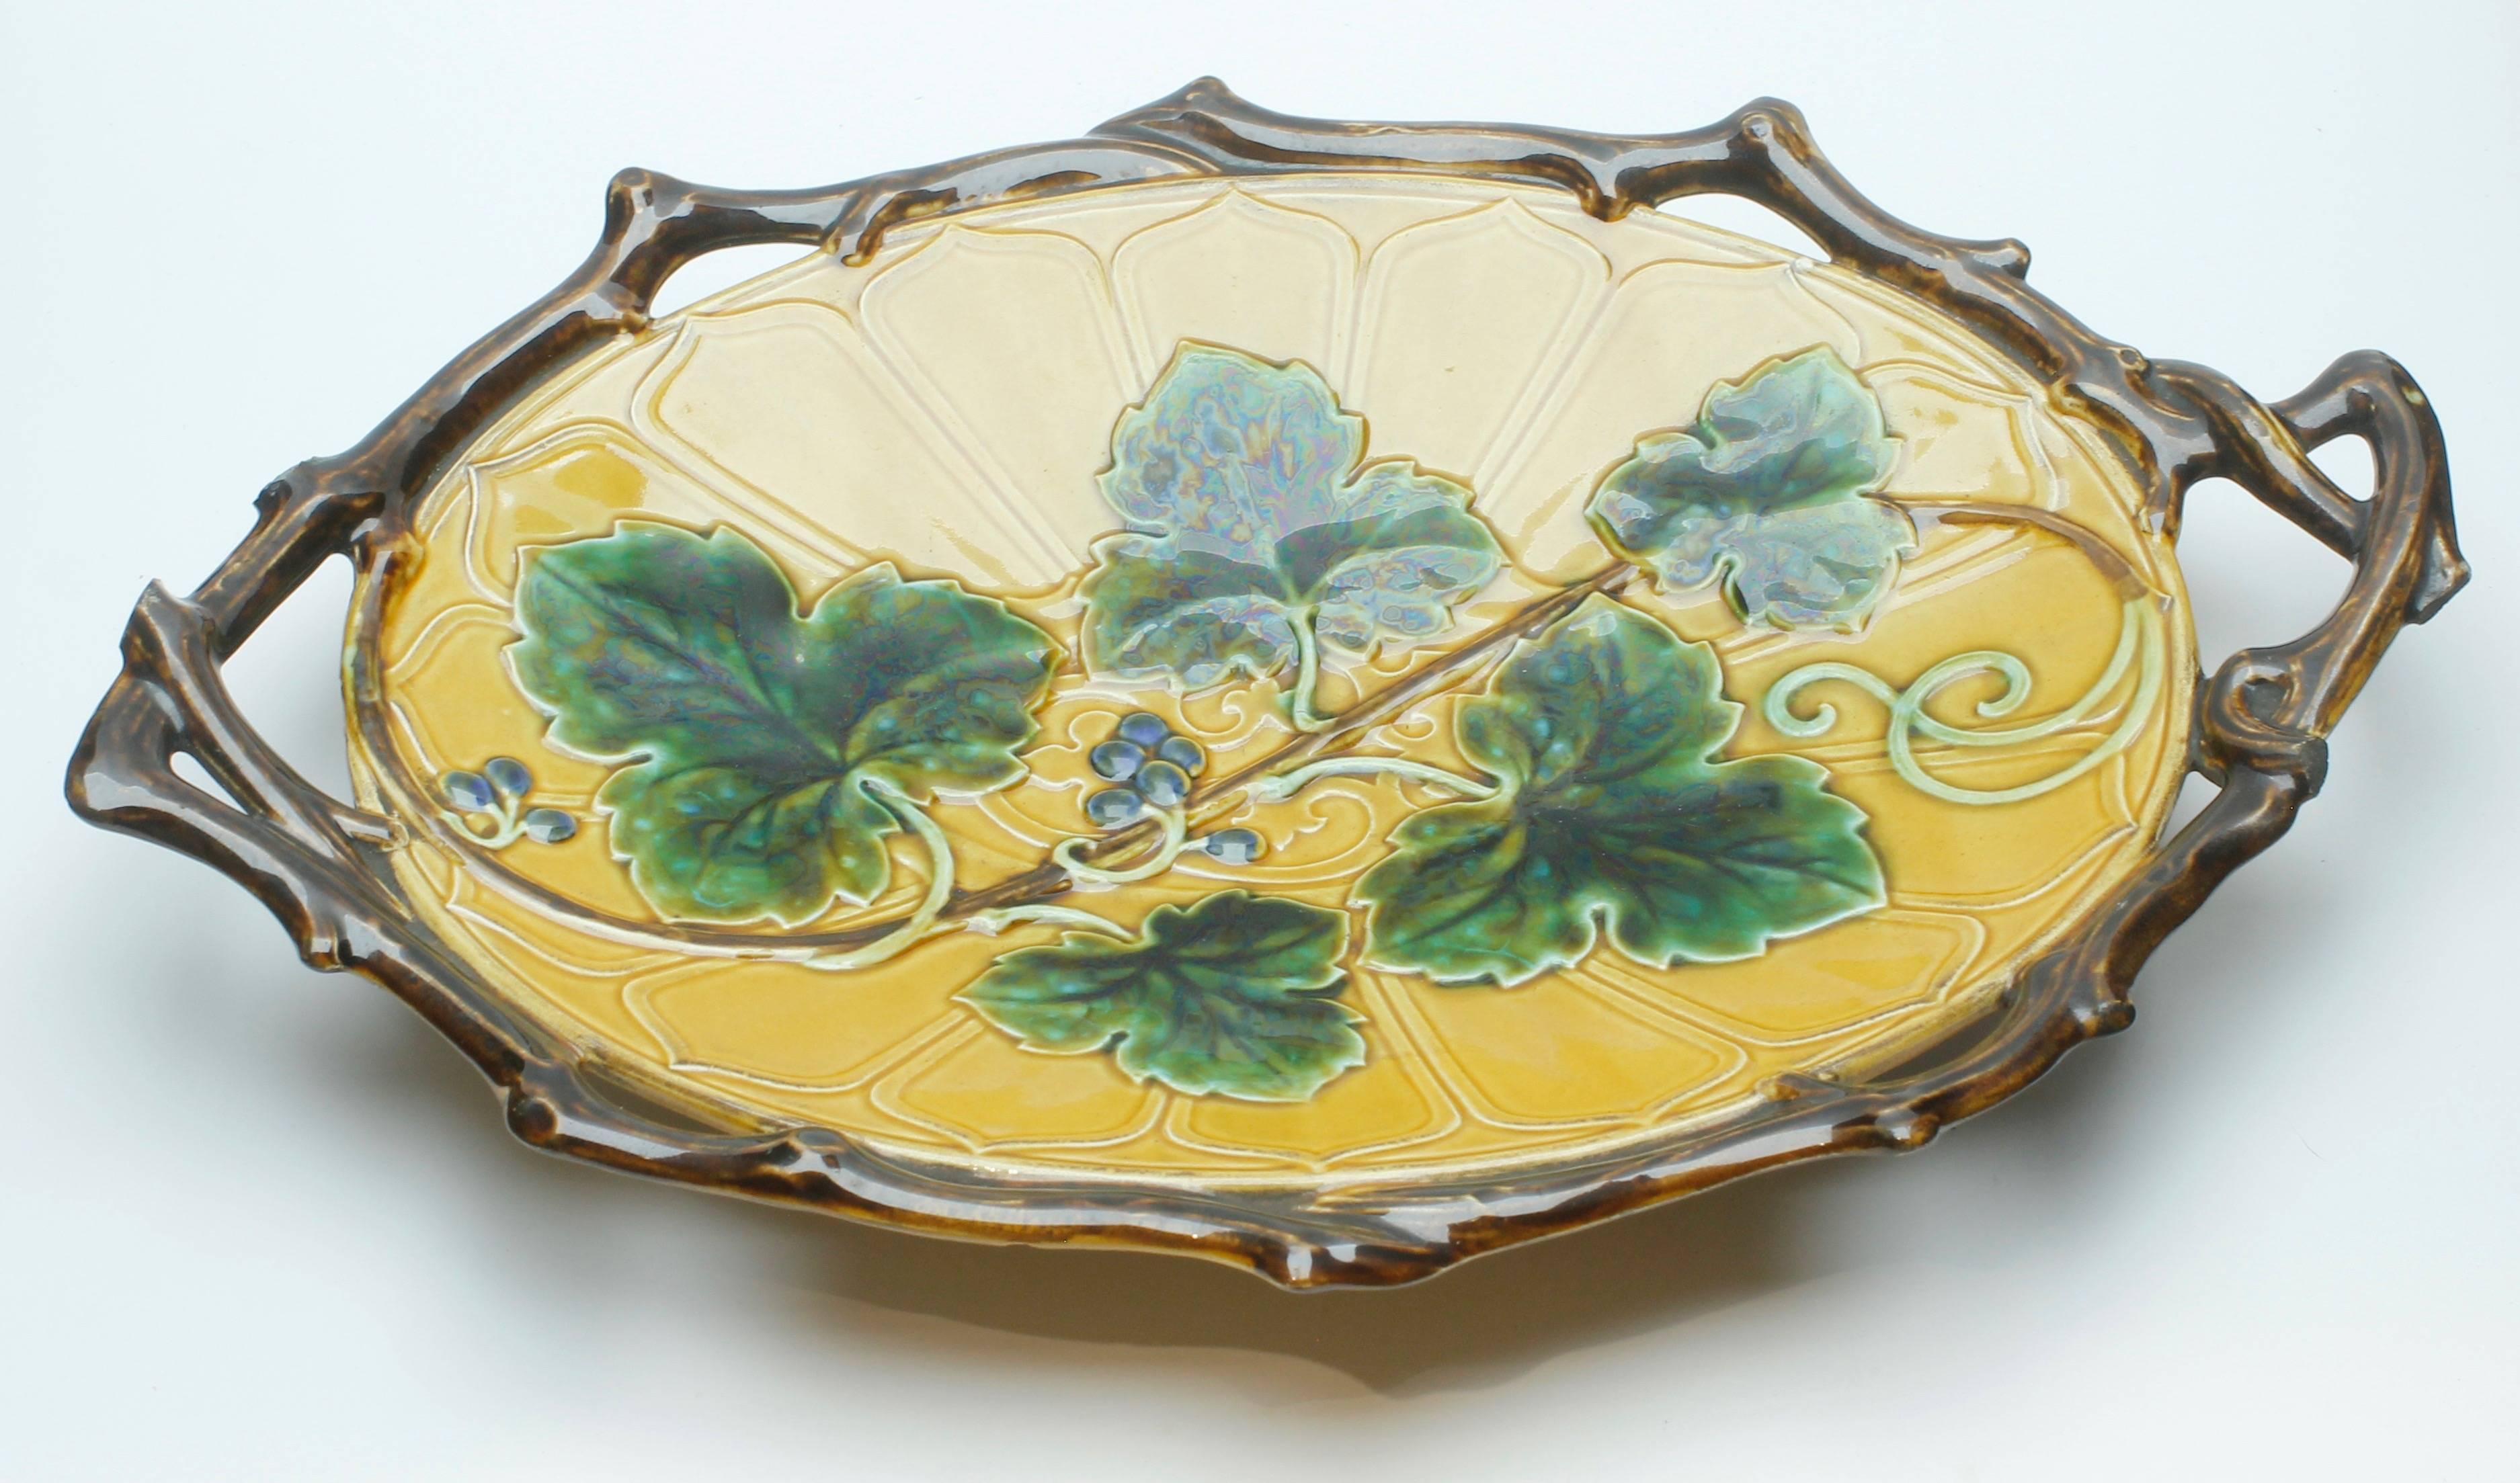 Luxembourgish Art Nouveau Majolica Pattern in Relief Set of 16 Plates Whit Boch Stamp, 1900s